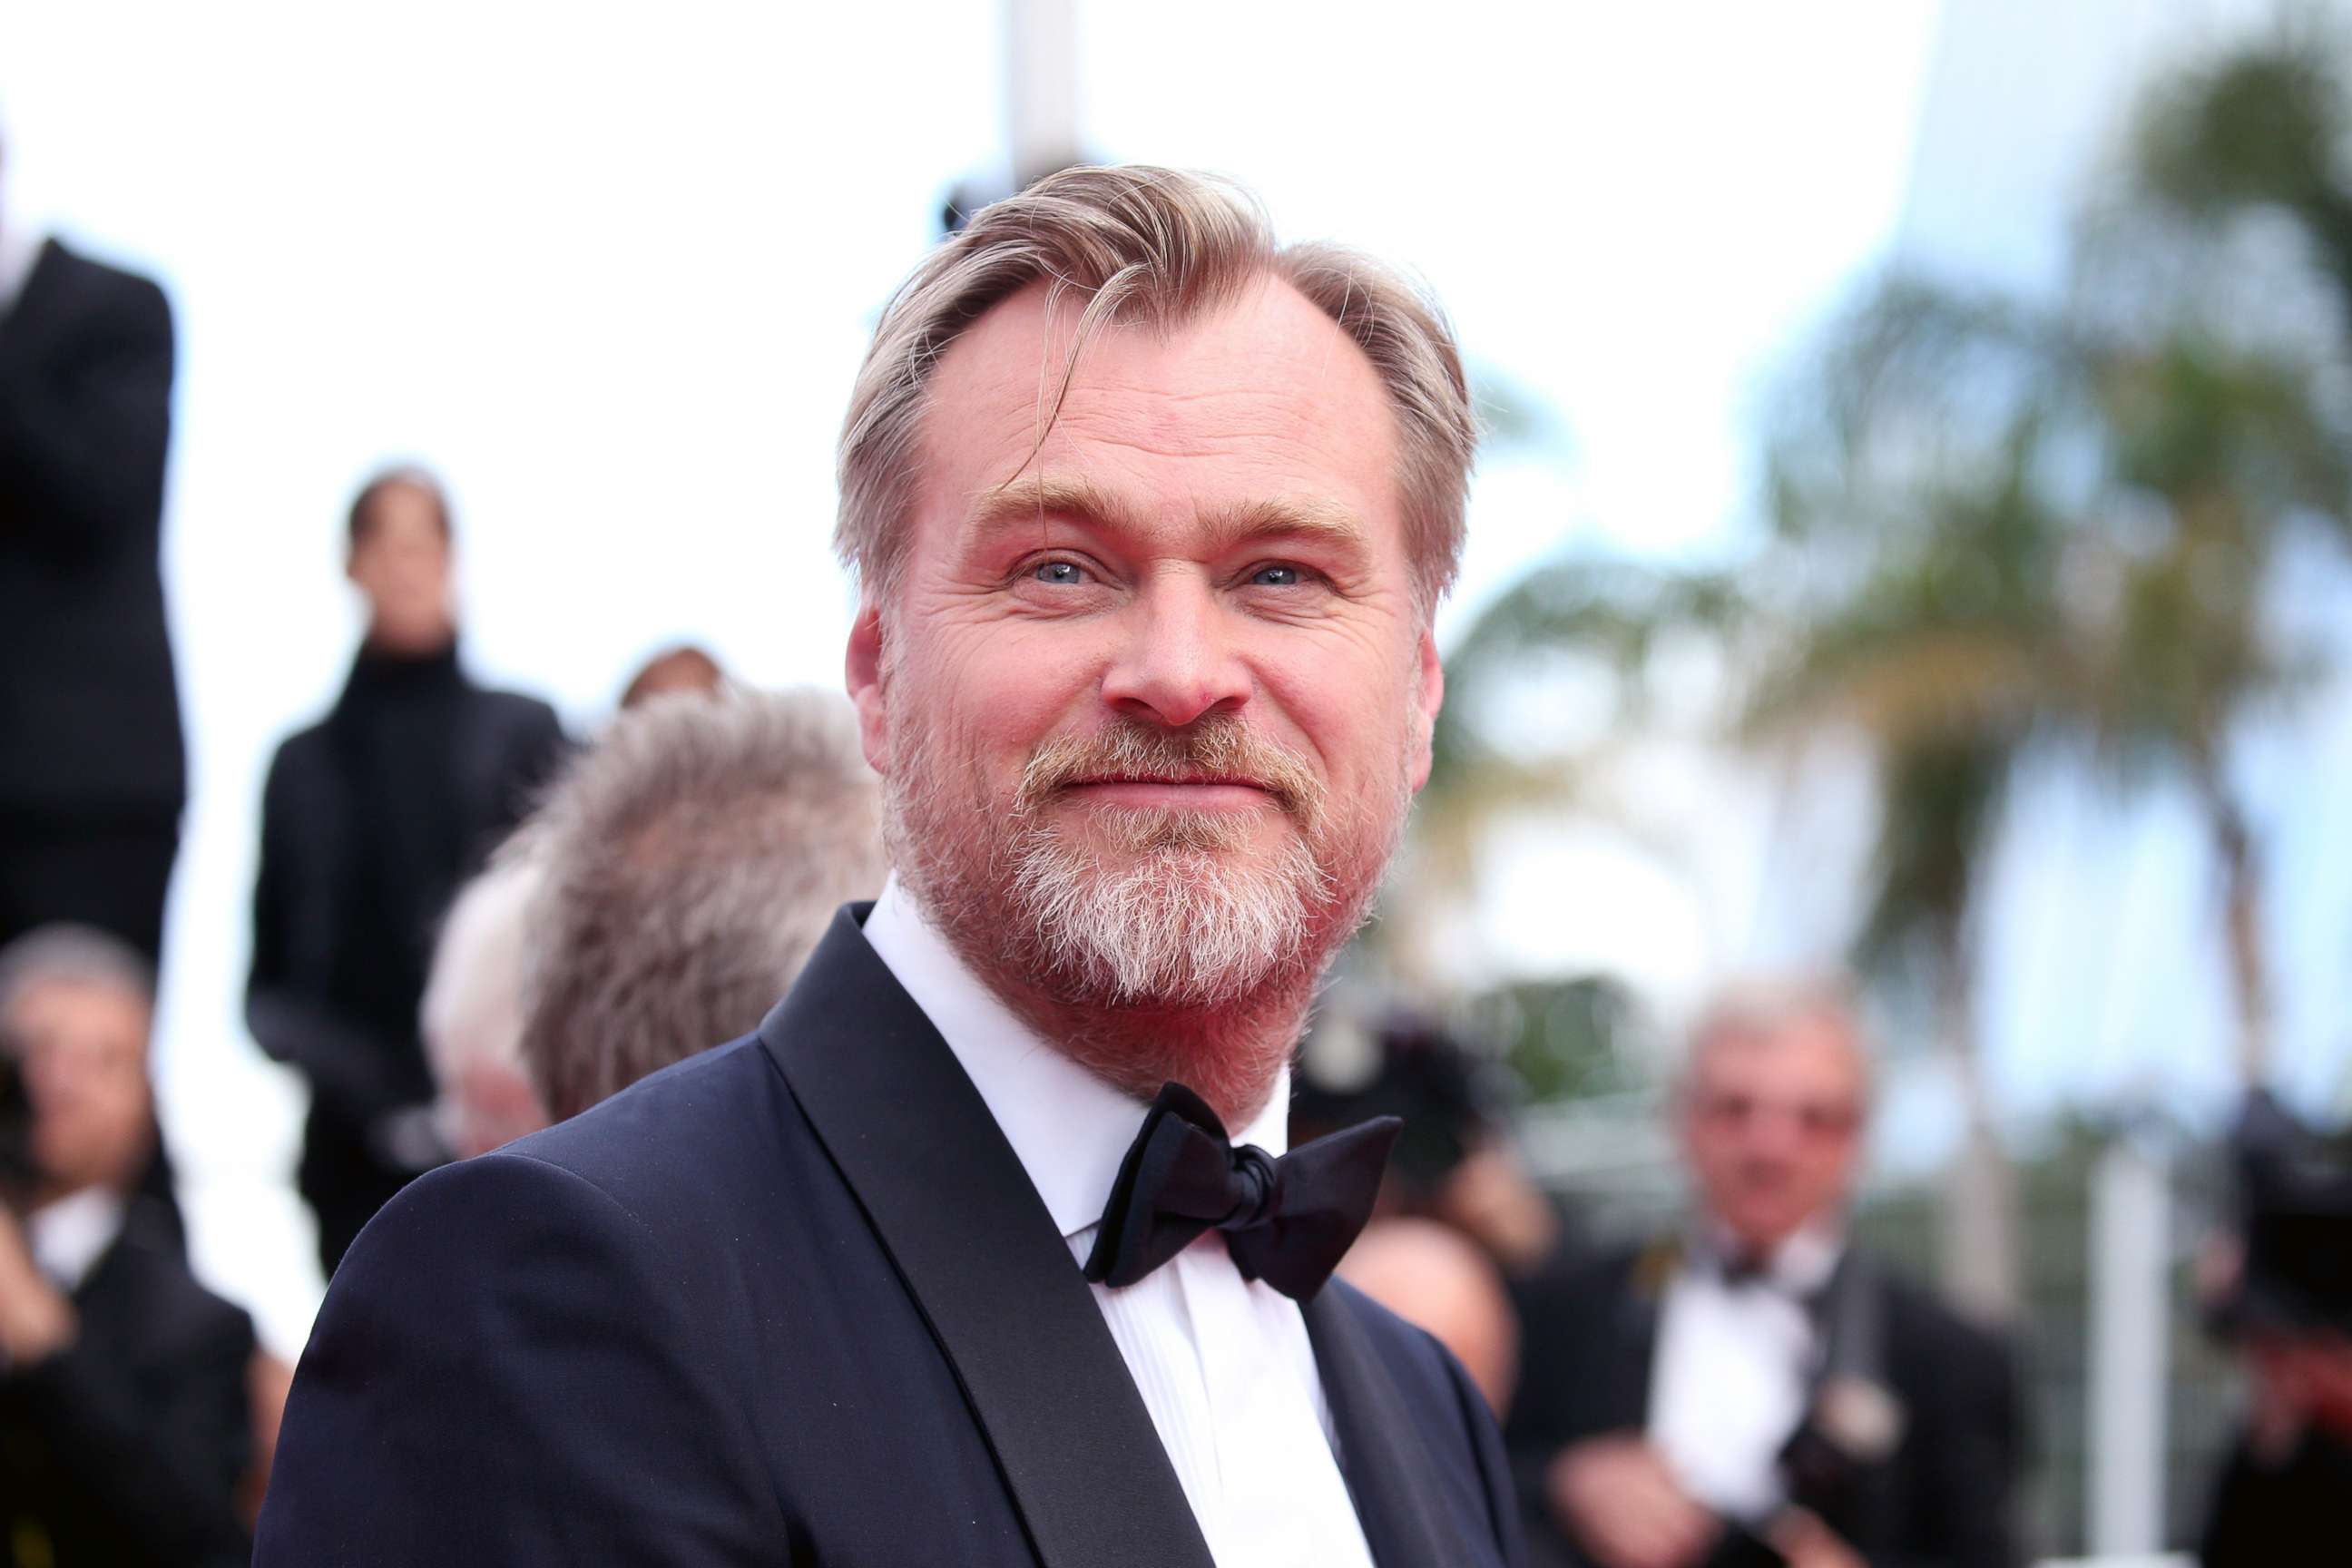 PHOTO: Director Christopher Nolan on May 13, 2018 in Cannes, France.